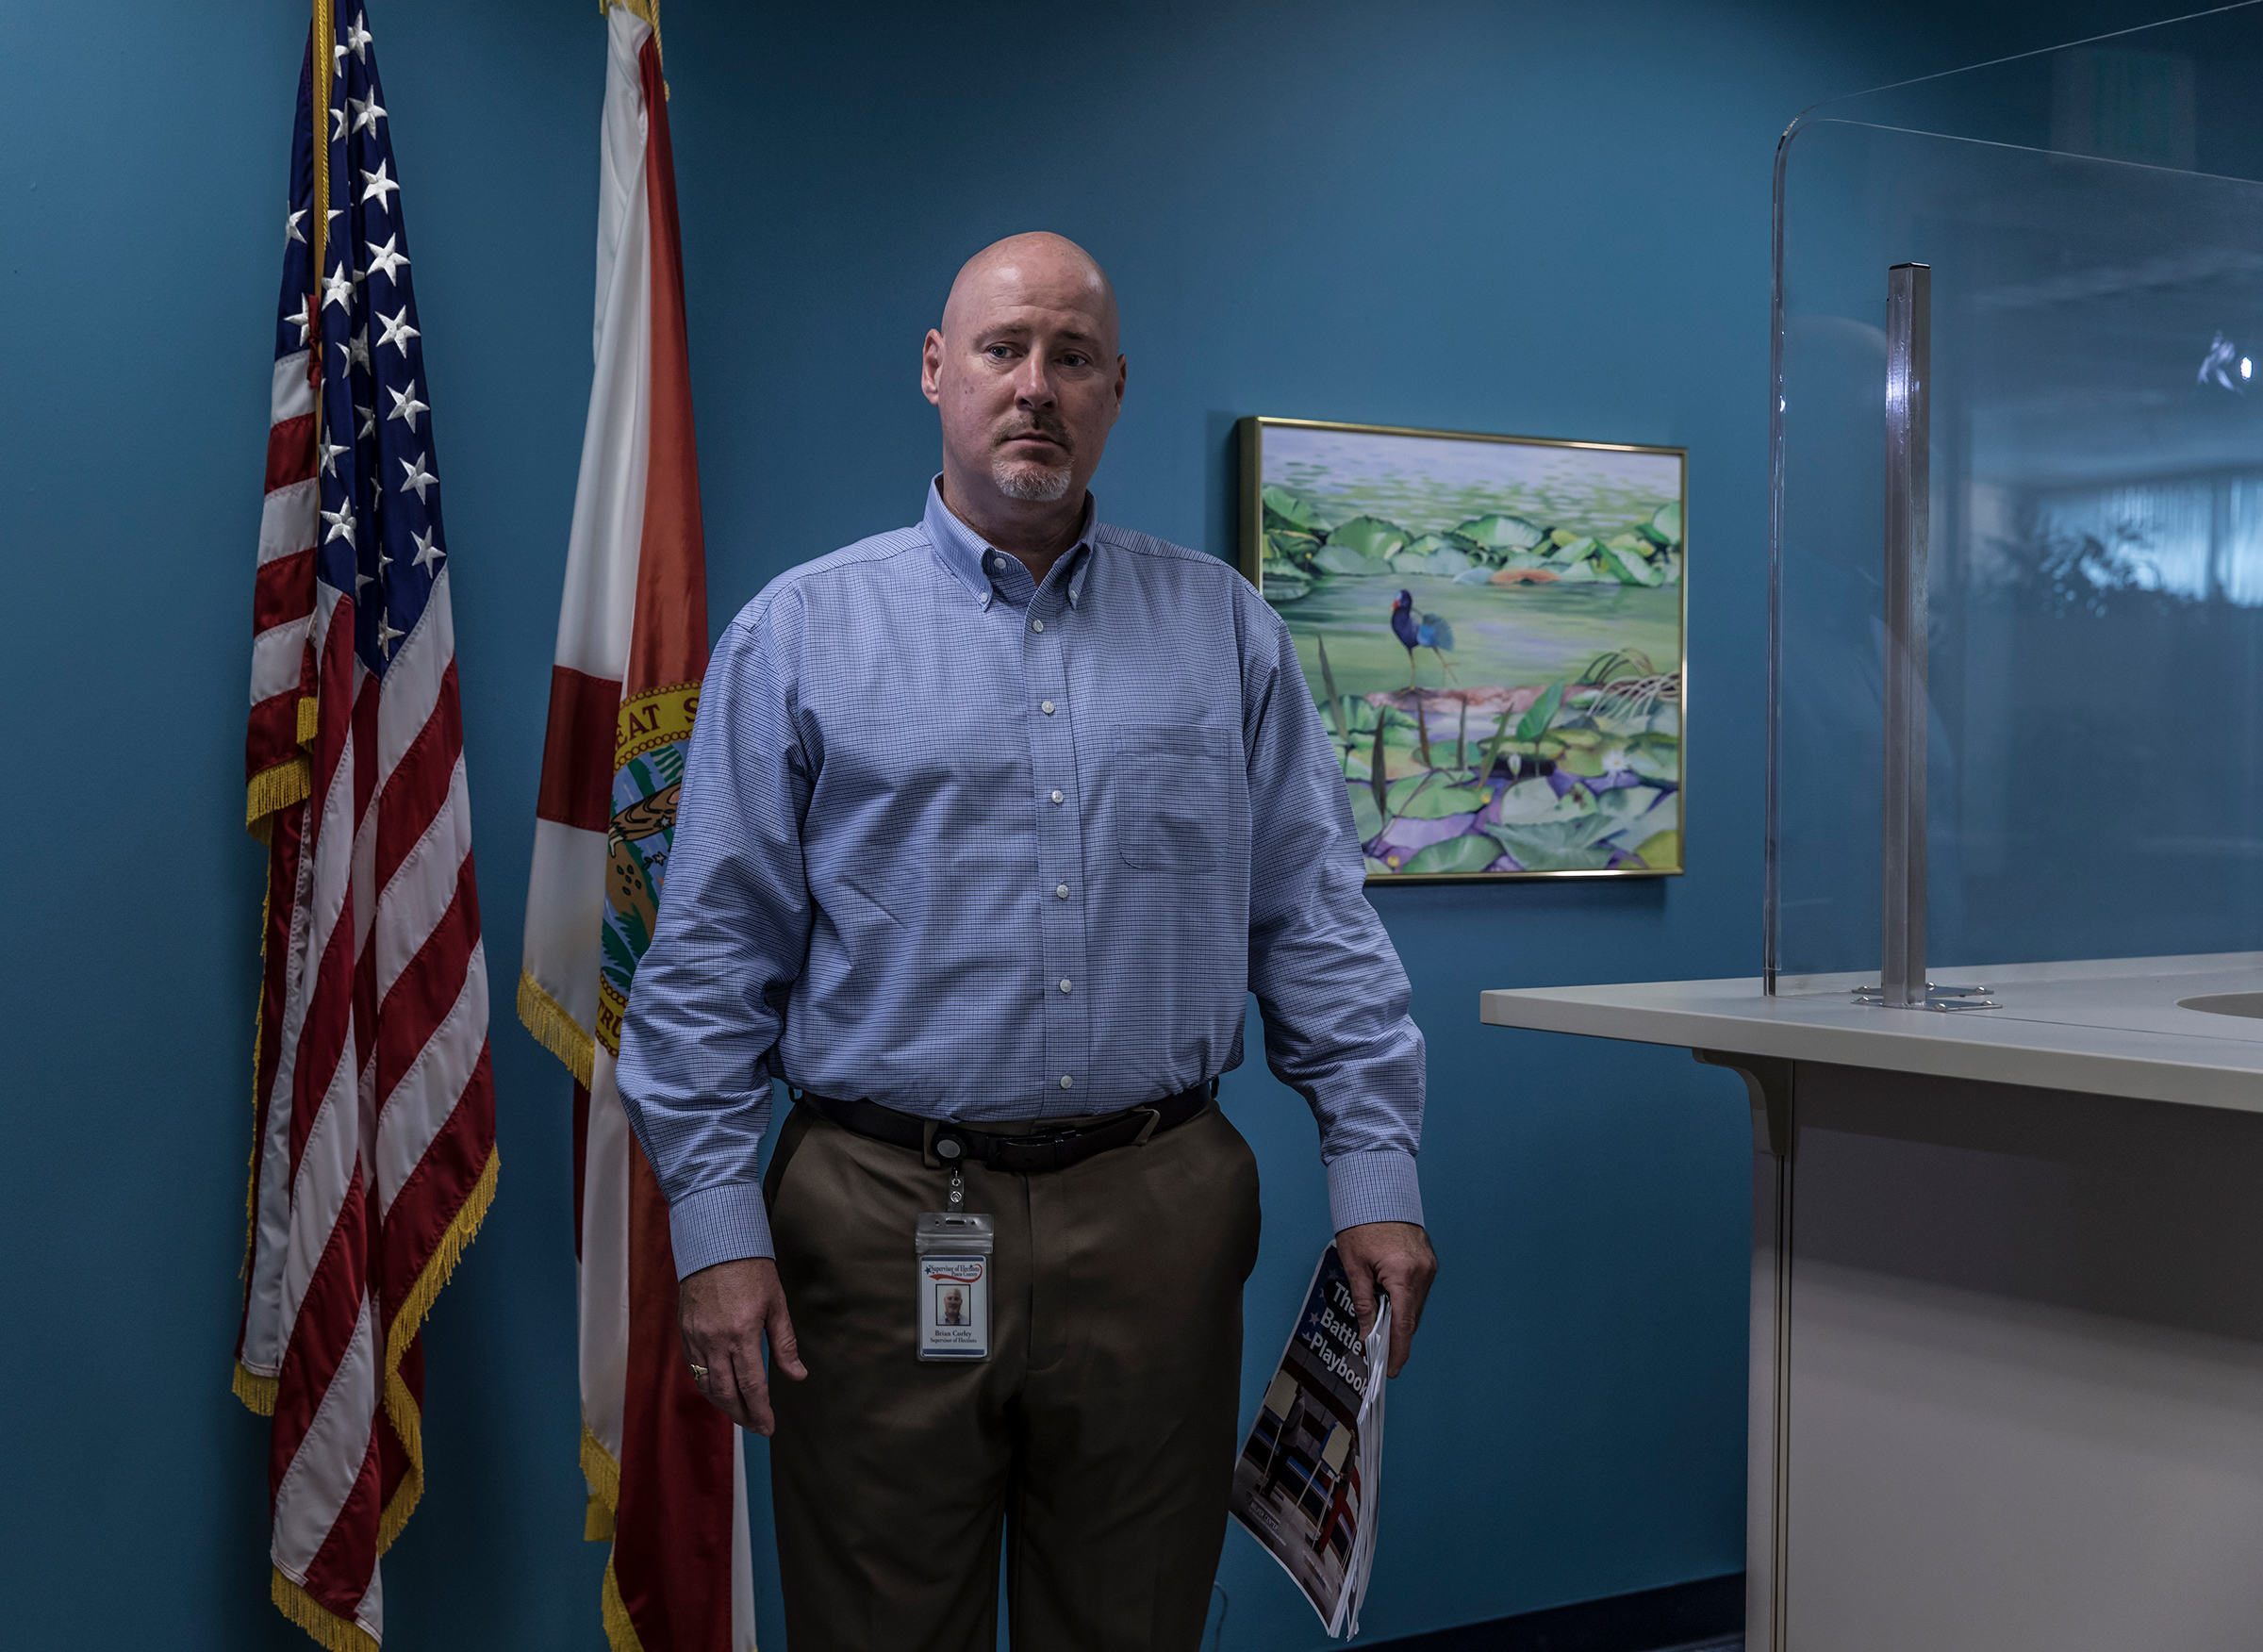 "It’s tough to put the genie back in the bottle." - Brian Corley, supervisor of elections, Pasco County, Florida (Republican) (Christopher Morris—VII for TIME)